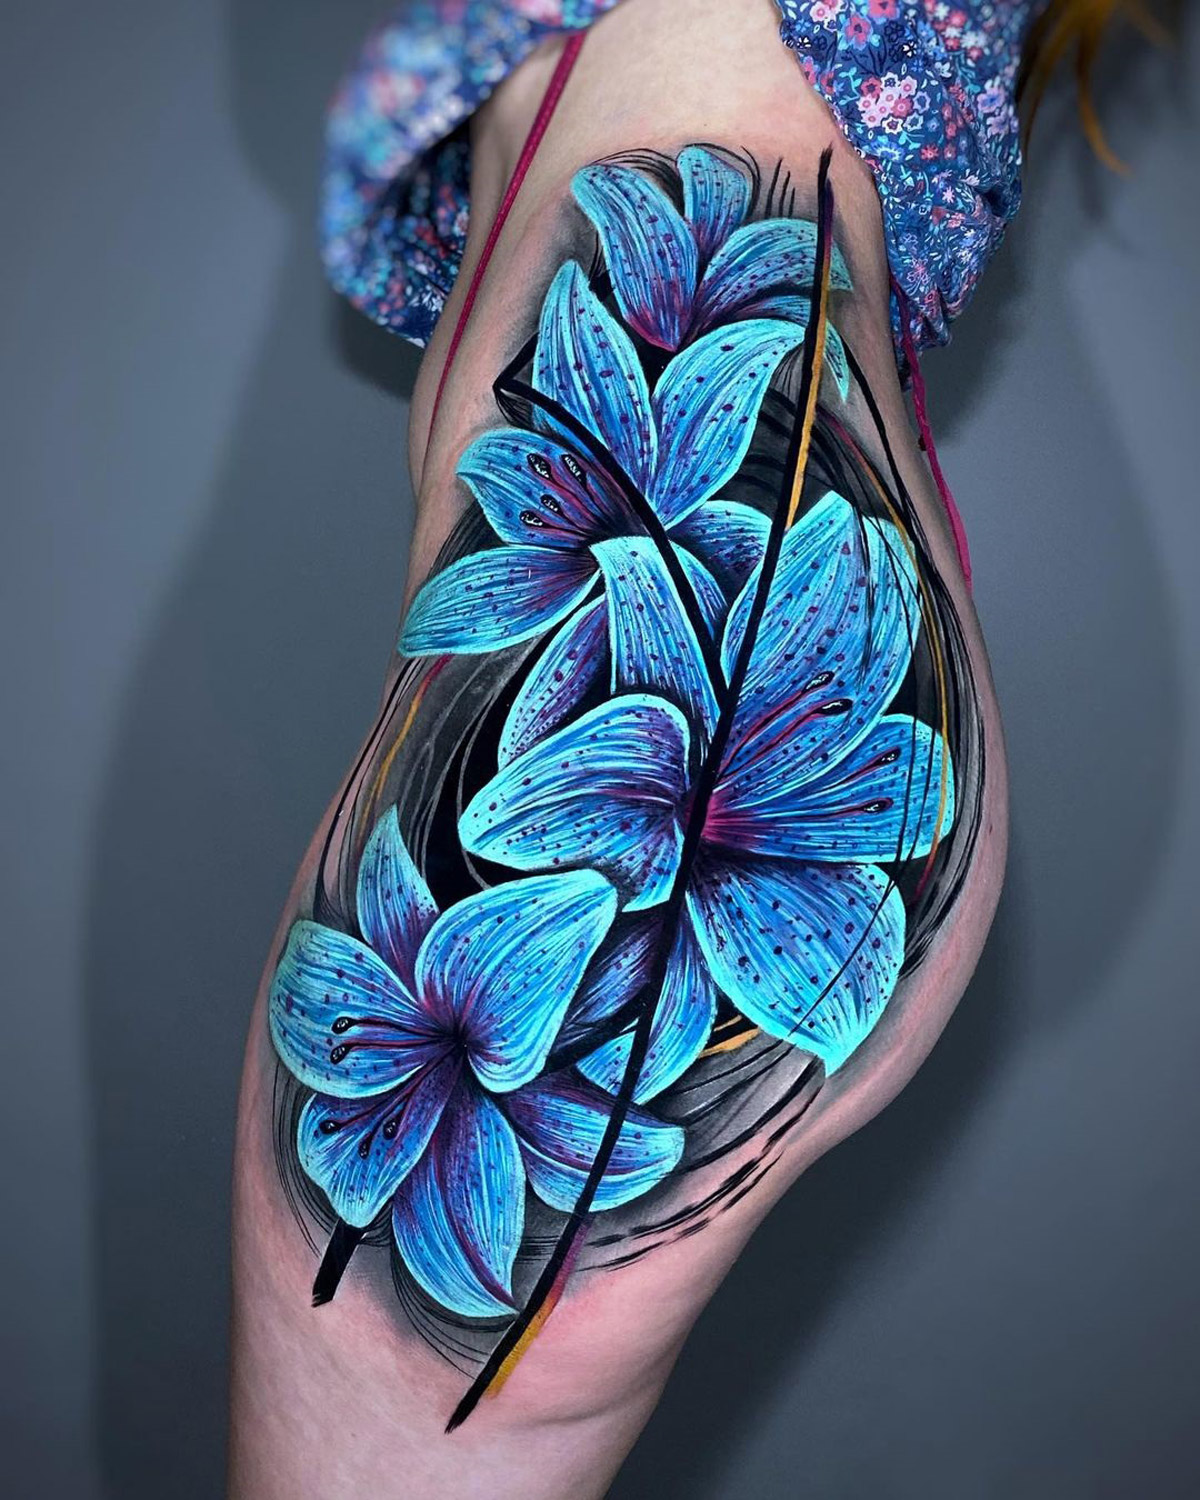 Big blue flower on side - (Tattoo Pictures)(Tattoo Pictures)